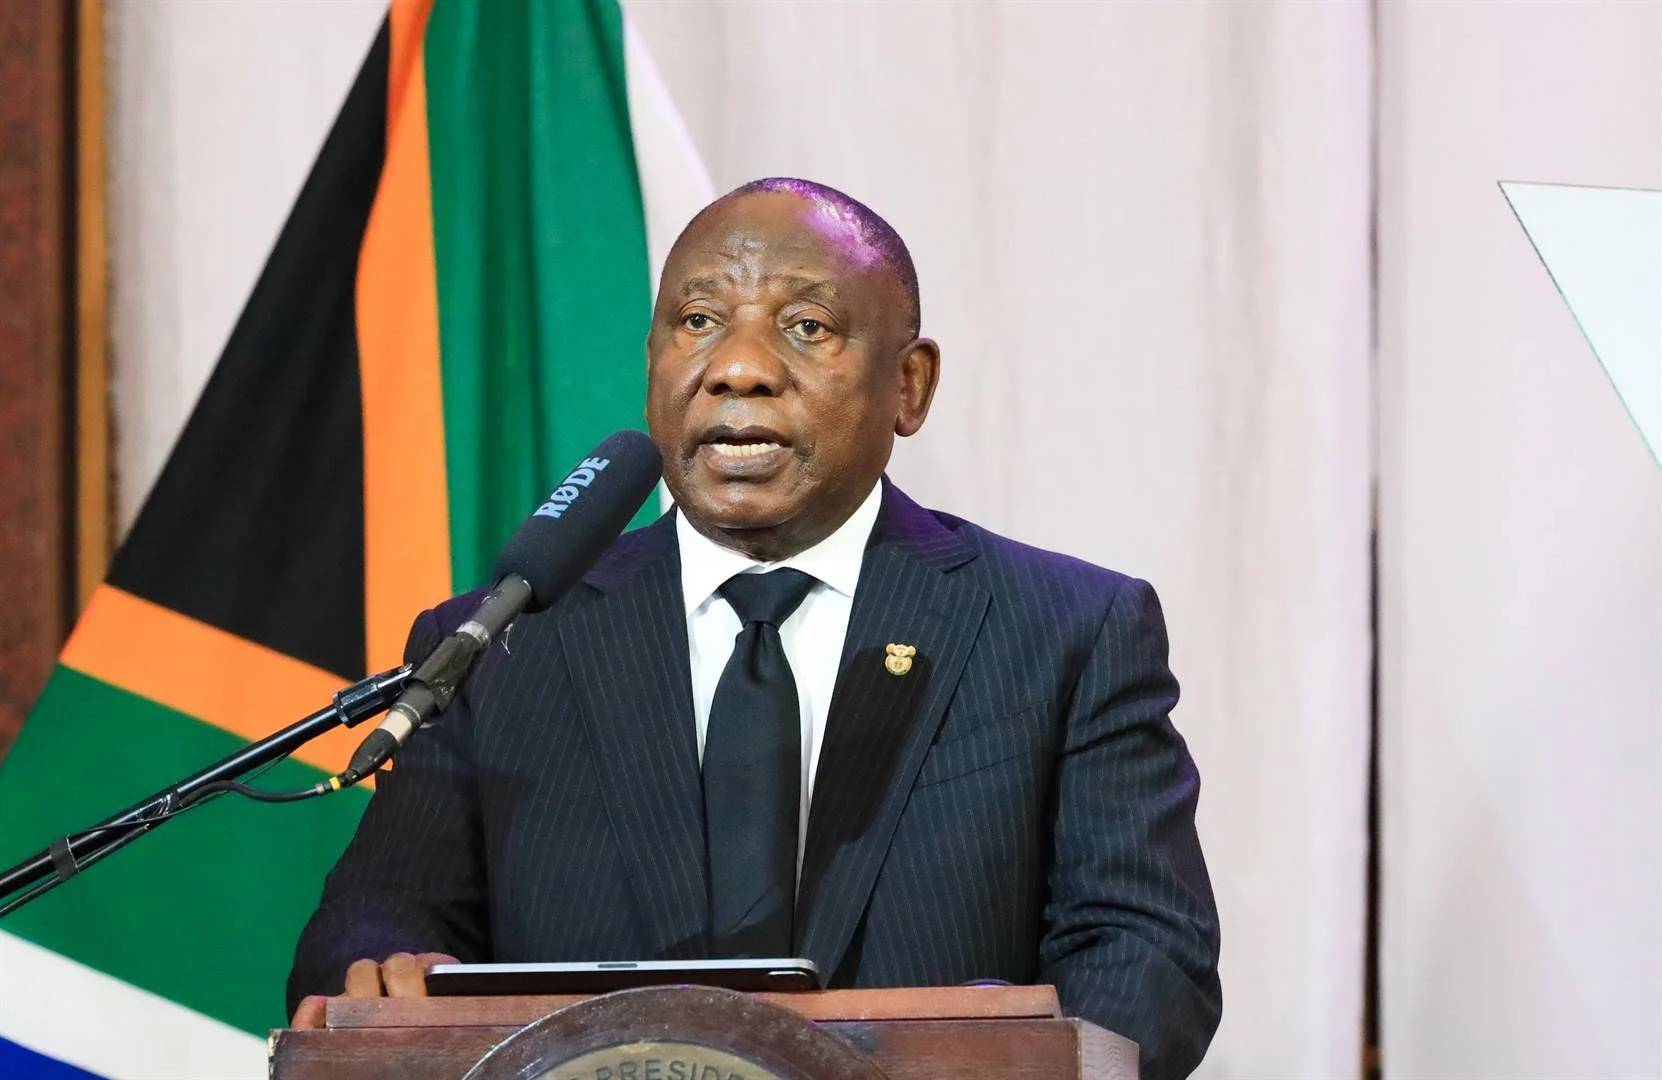 President Cyril Ramaphosa has welcomed the ICJ ruling on Gaza. Photo by Gallo Images